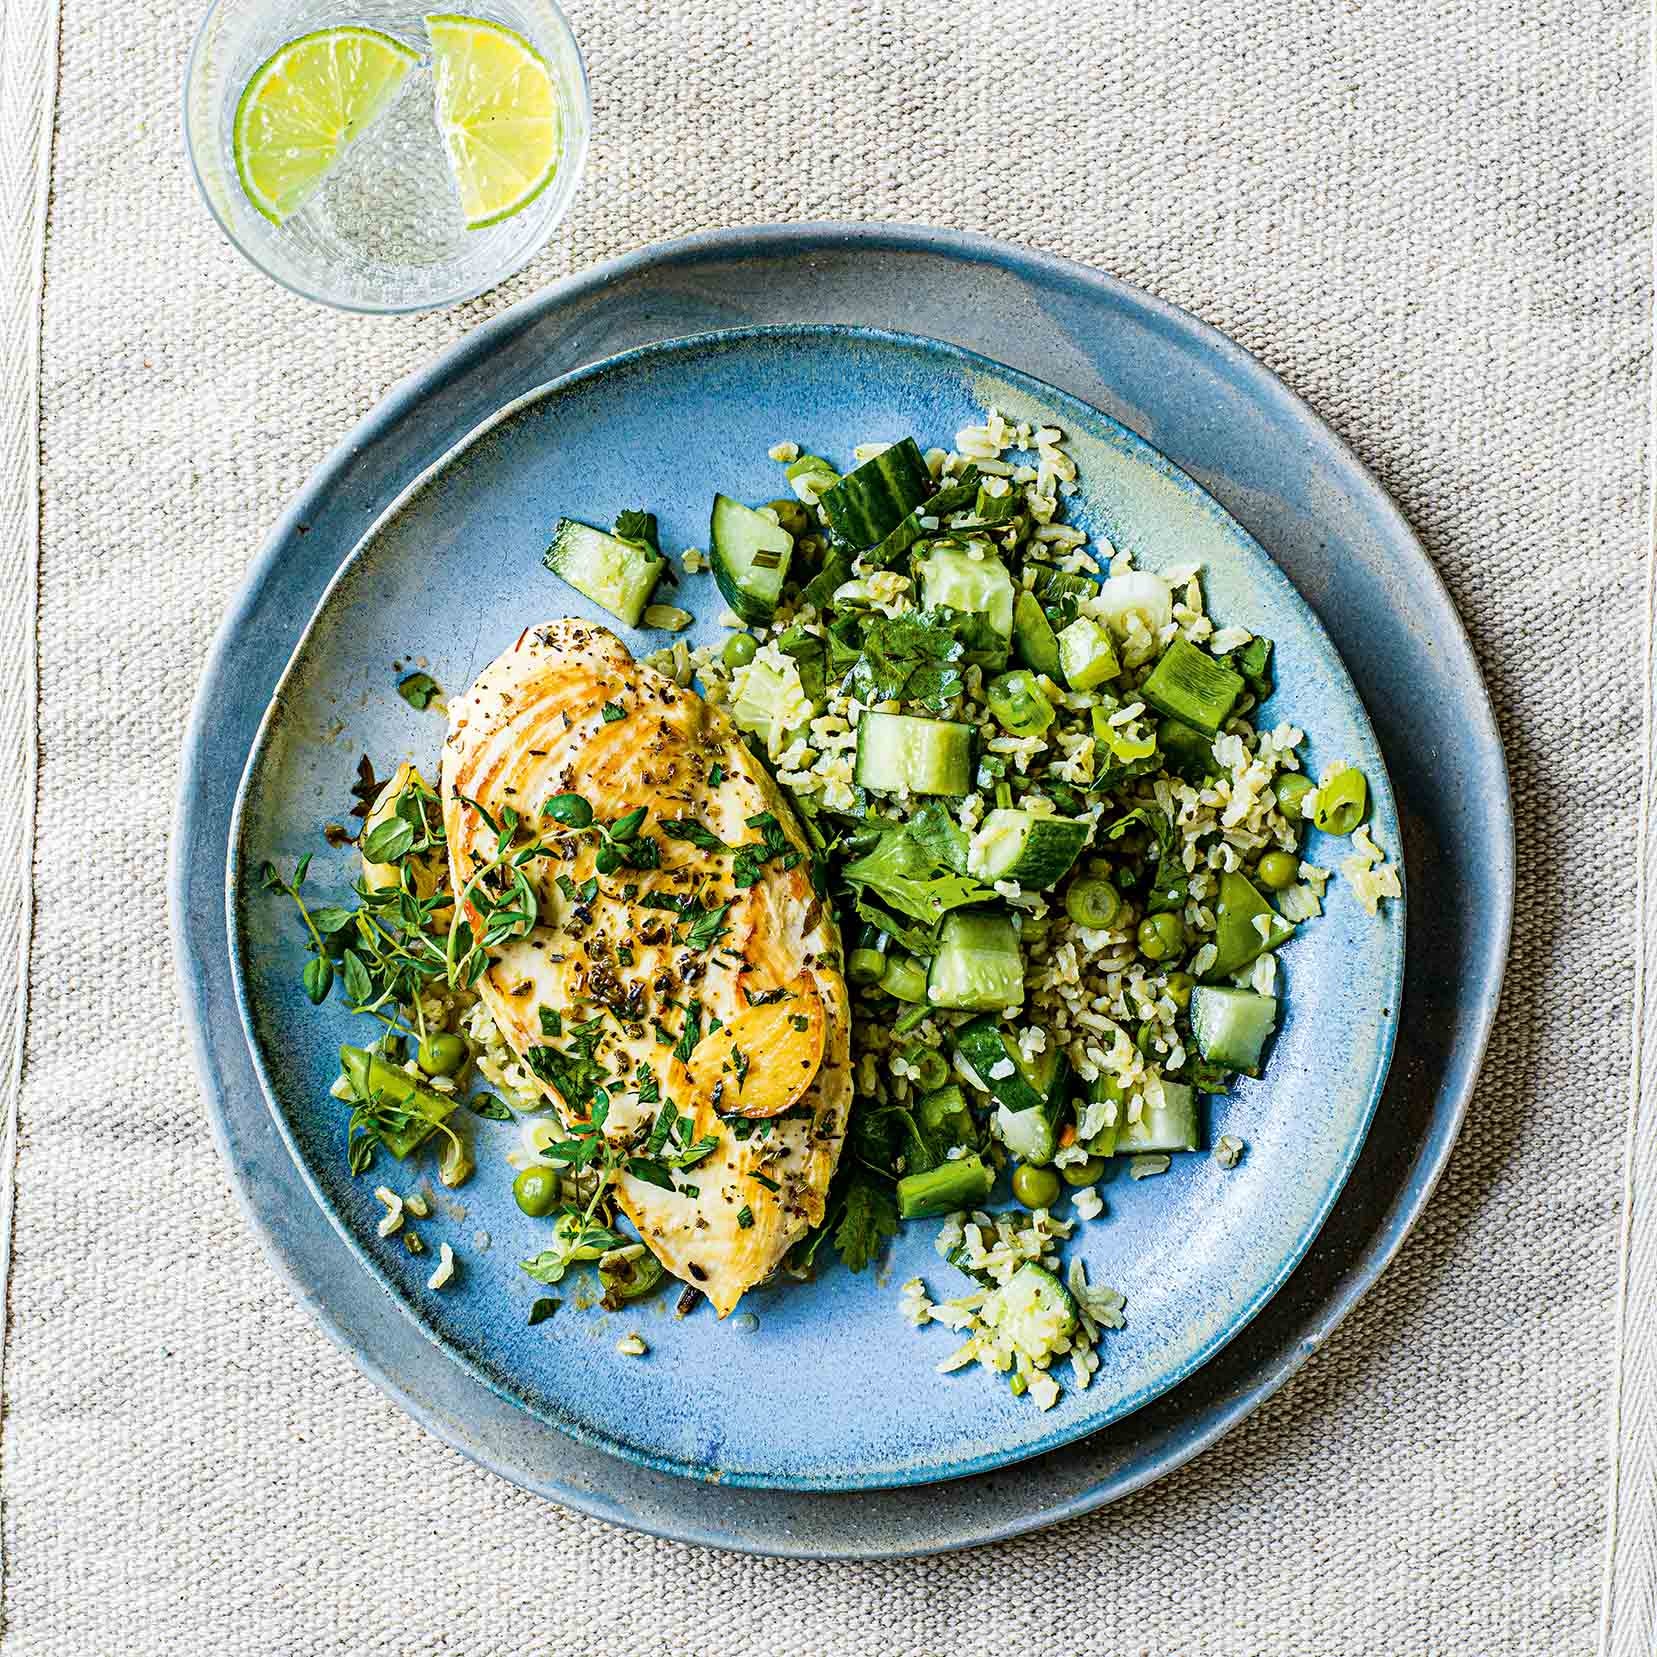 Photo of Herb-roasted chicken with herbed rice salad by WW